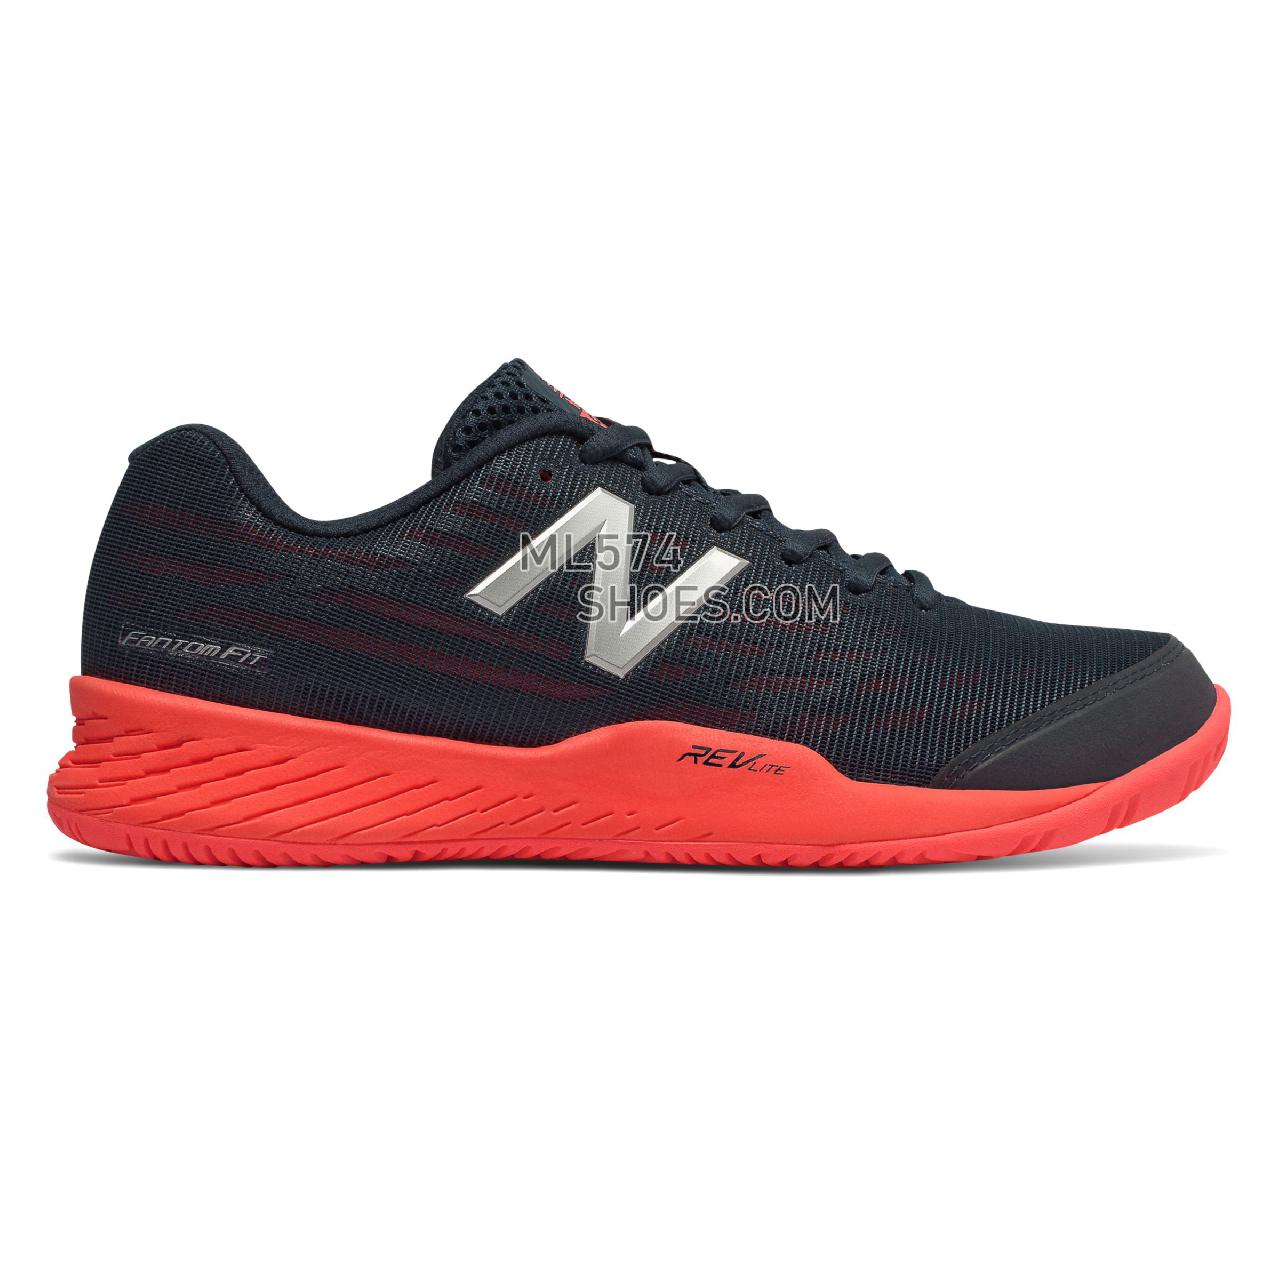 New Balance 896v2 - Women's 896 - Tennis / Court Galaxy with Dragonfly - WCH896F2